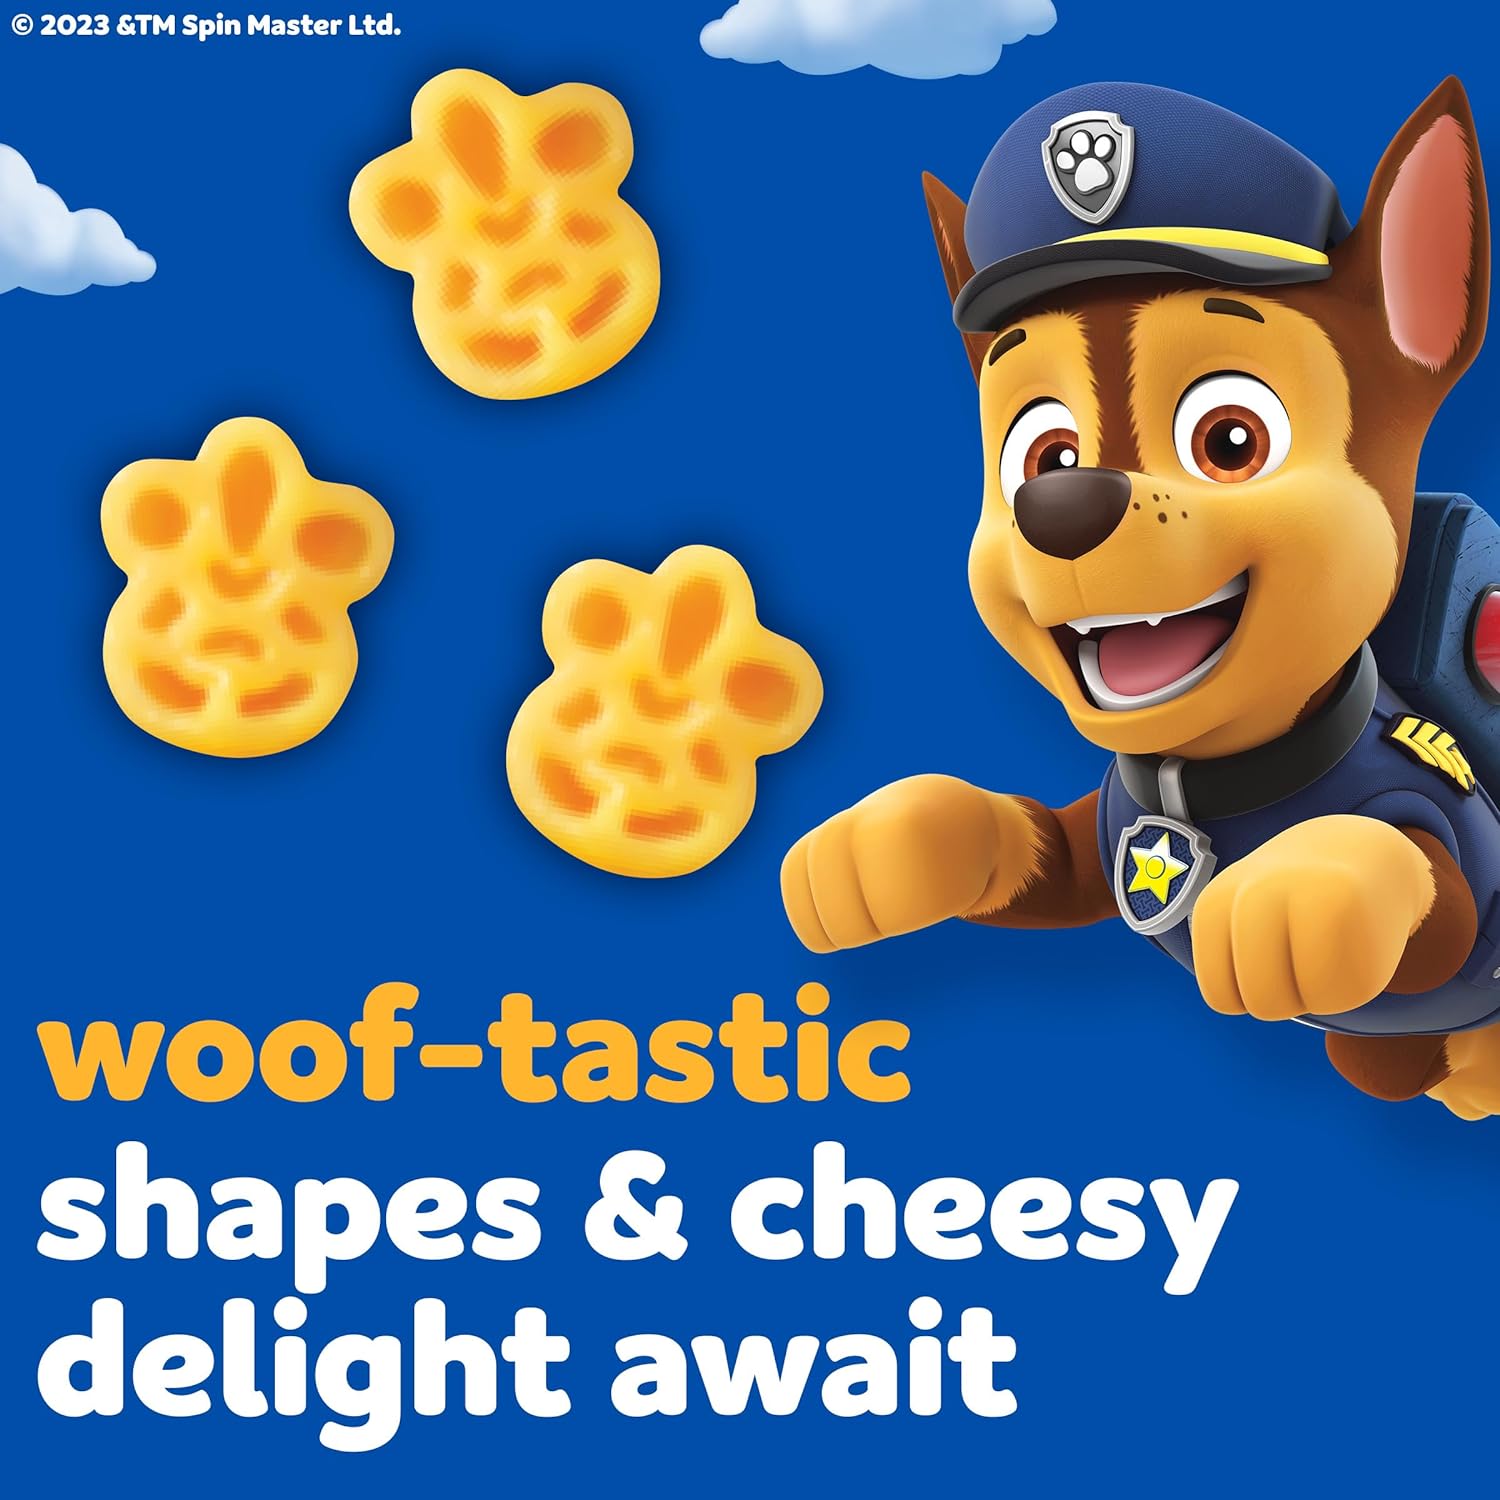 Kraft Easy Microwavable Macaroni and Cheese Cups with Nickelodeon Paw Patrol Pasta Shapes (4 ct Pack, 1.9 oz Cups) : Packaged Macaroni And Cheese : Grocery & Gourmet Food